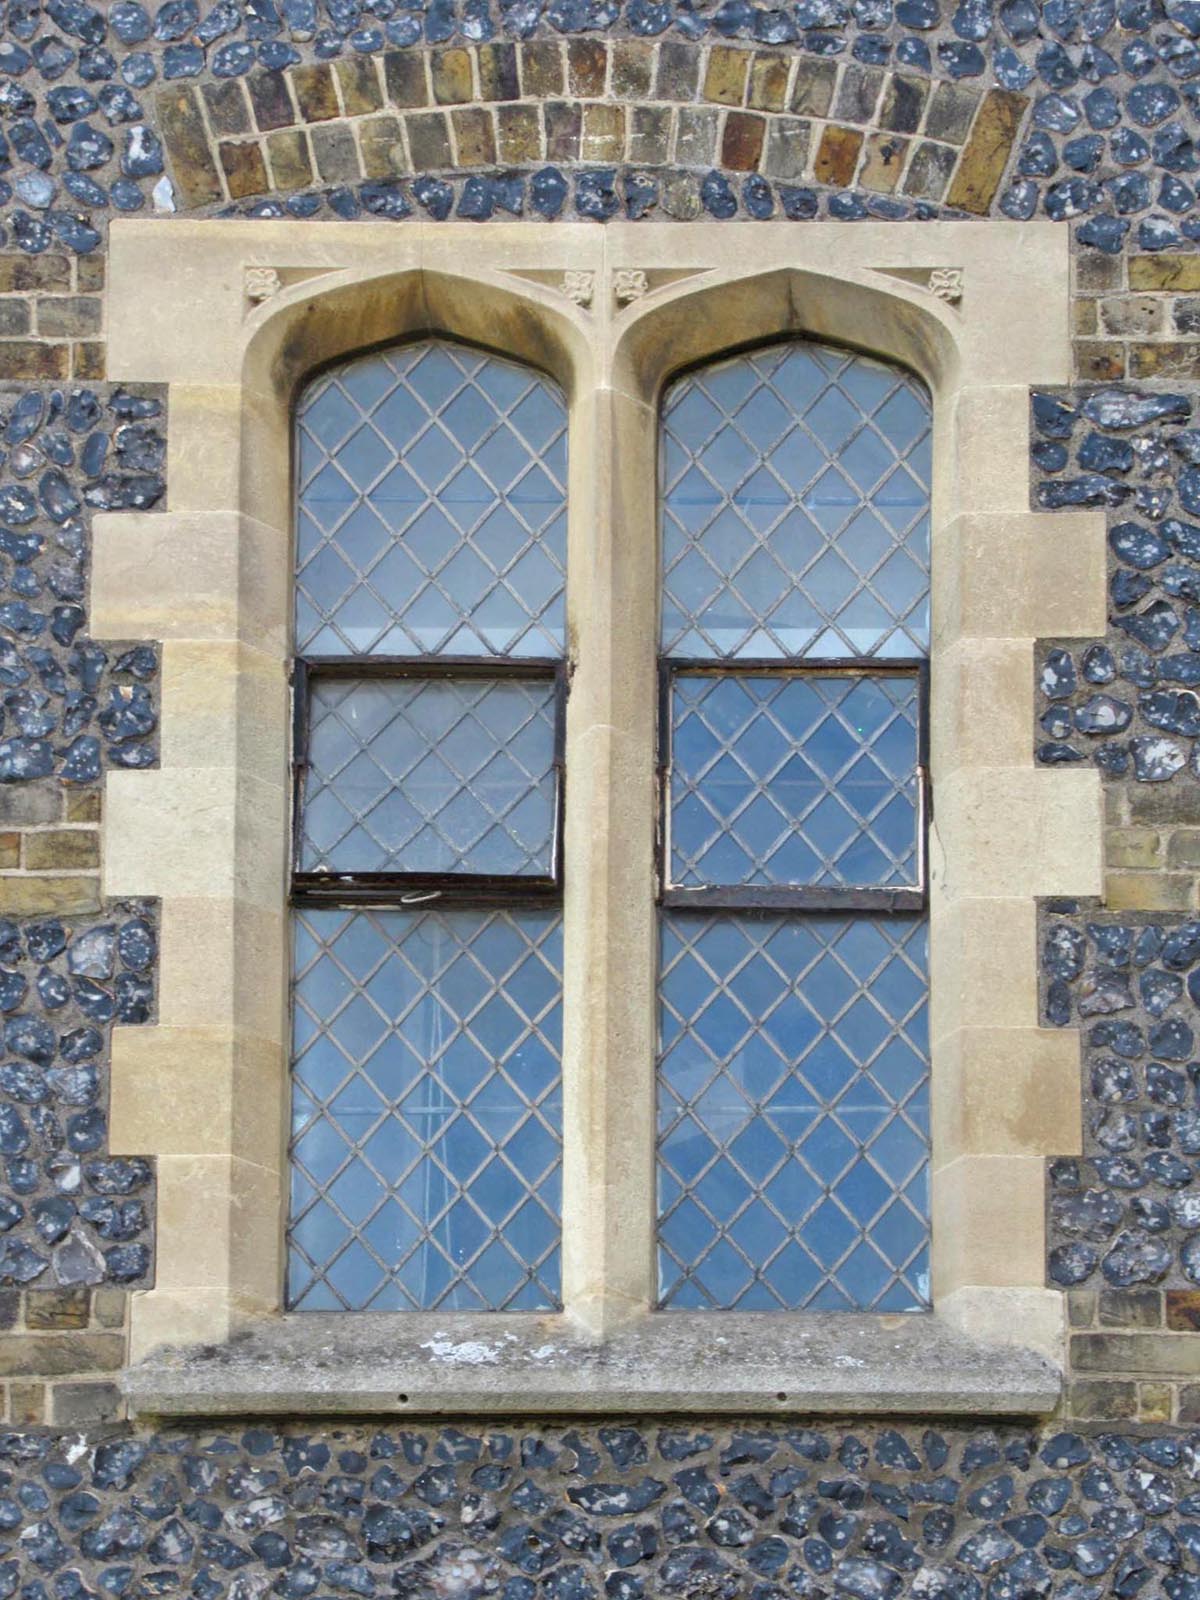 Gothic arched window